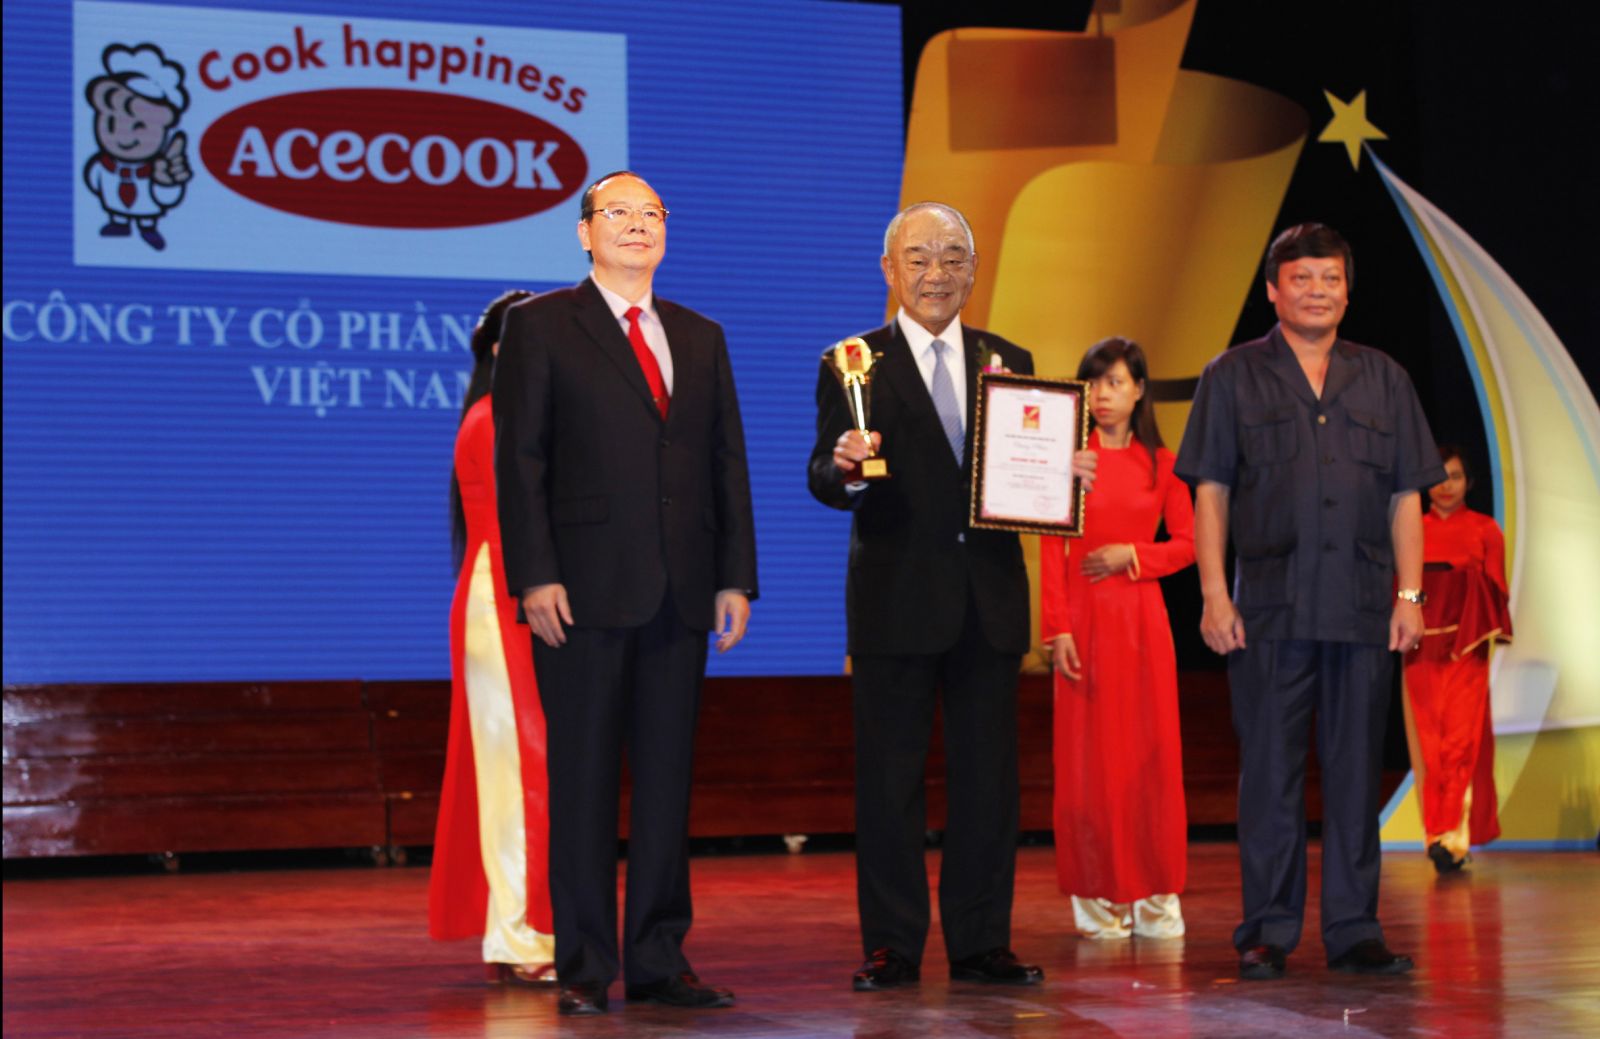 Mr. Kajiwara Junichi – General Director of Acecook Vietnam JSC received the award Top 10 best products and services of Vietnam 2015